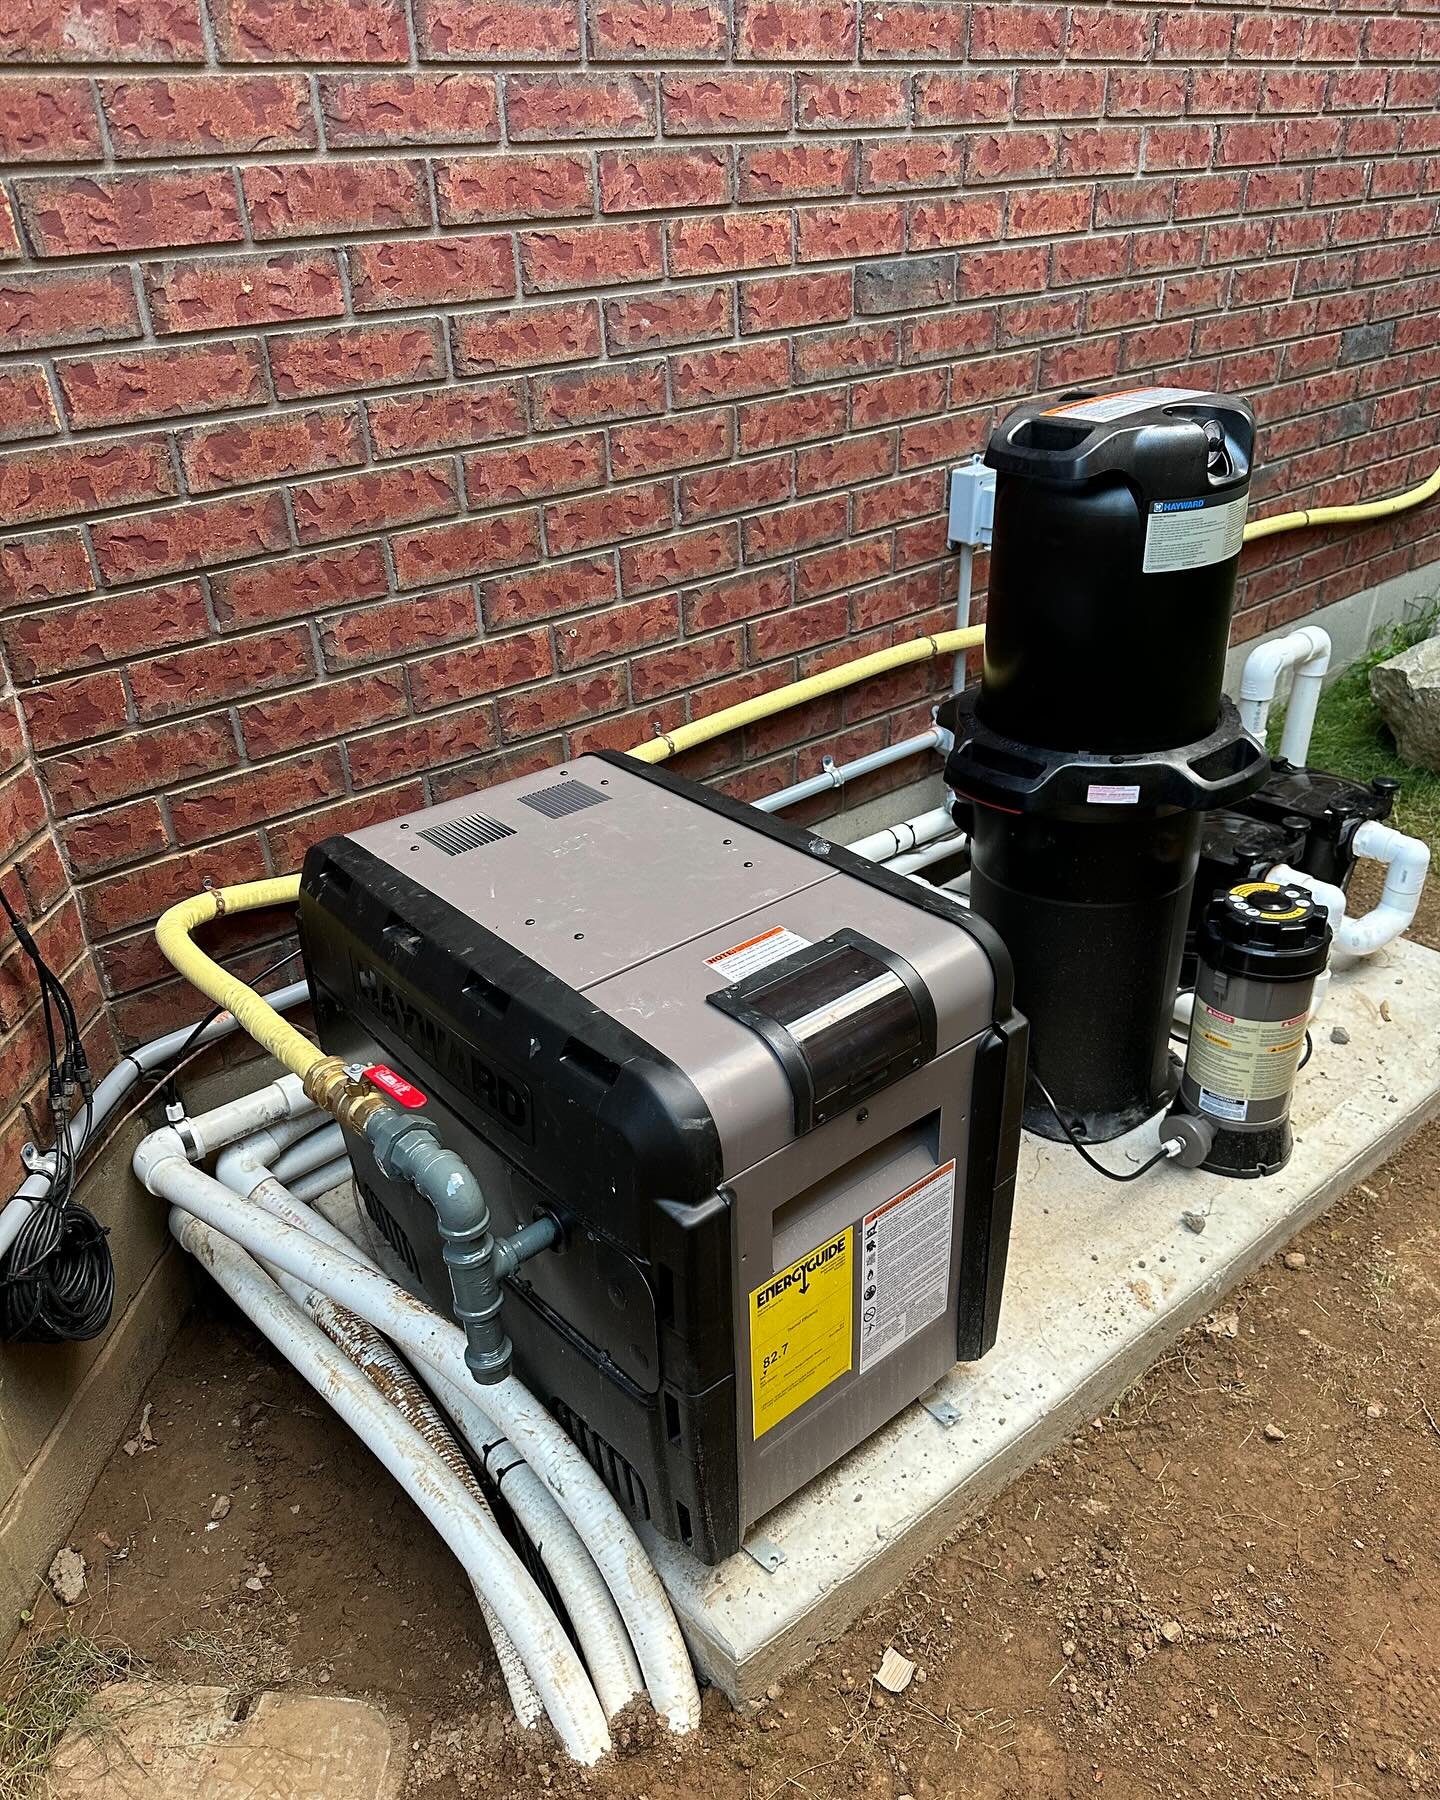 Another Pool Heater Installation Complete 👌🏼 

Pool heater installation &amp; maintenance services available. Call us today! 

(905) 541-5888 
www.beyondthesite.ca

#beyondthesite #onsite #BTS #jobsite #construction #hvac #milwaukee #carpentry #hea